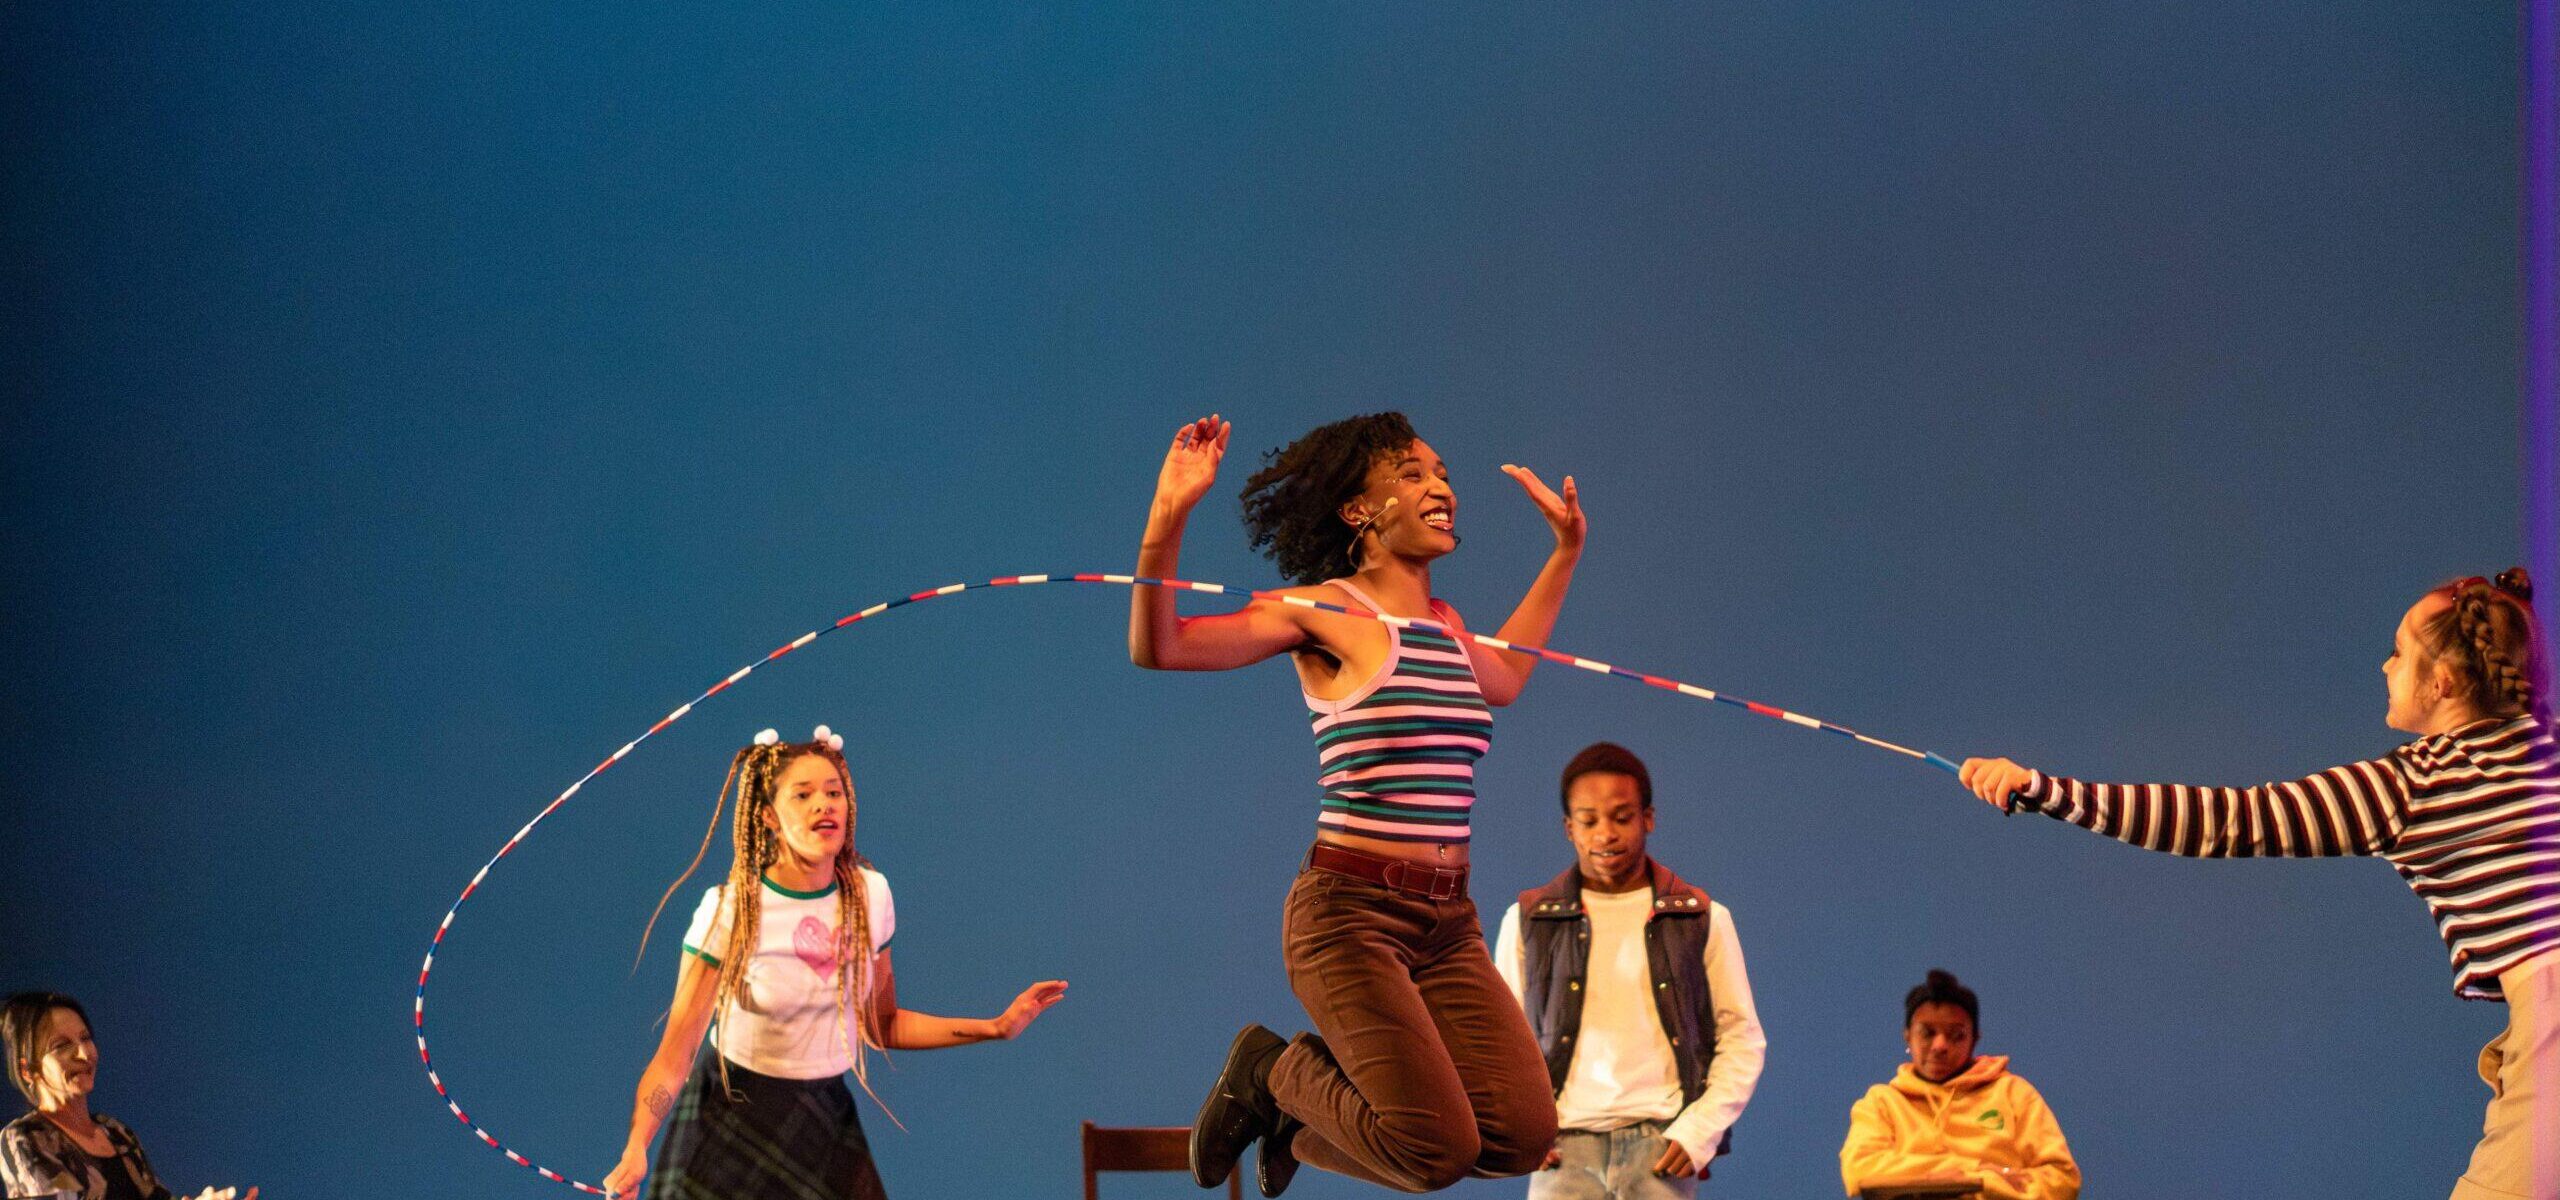 Dancers on stage with one dancer in a jump with a jumprope